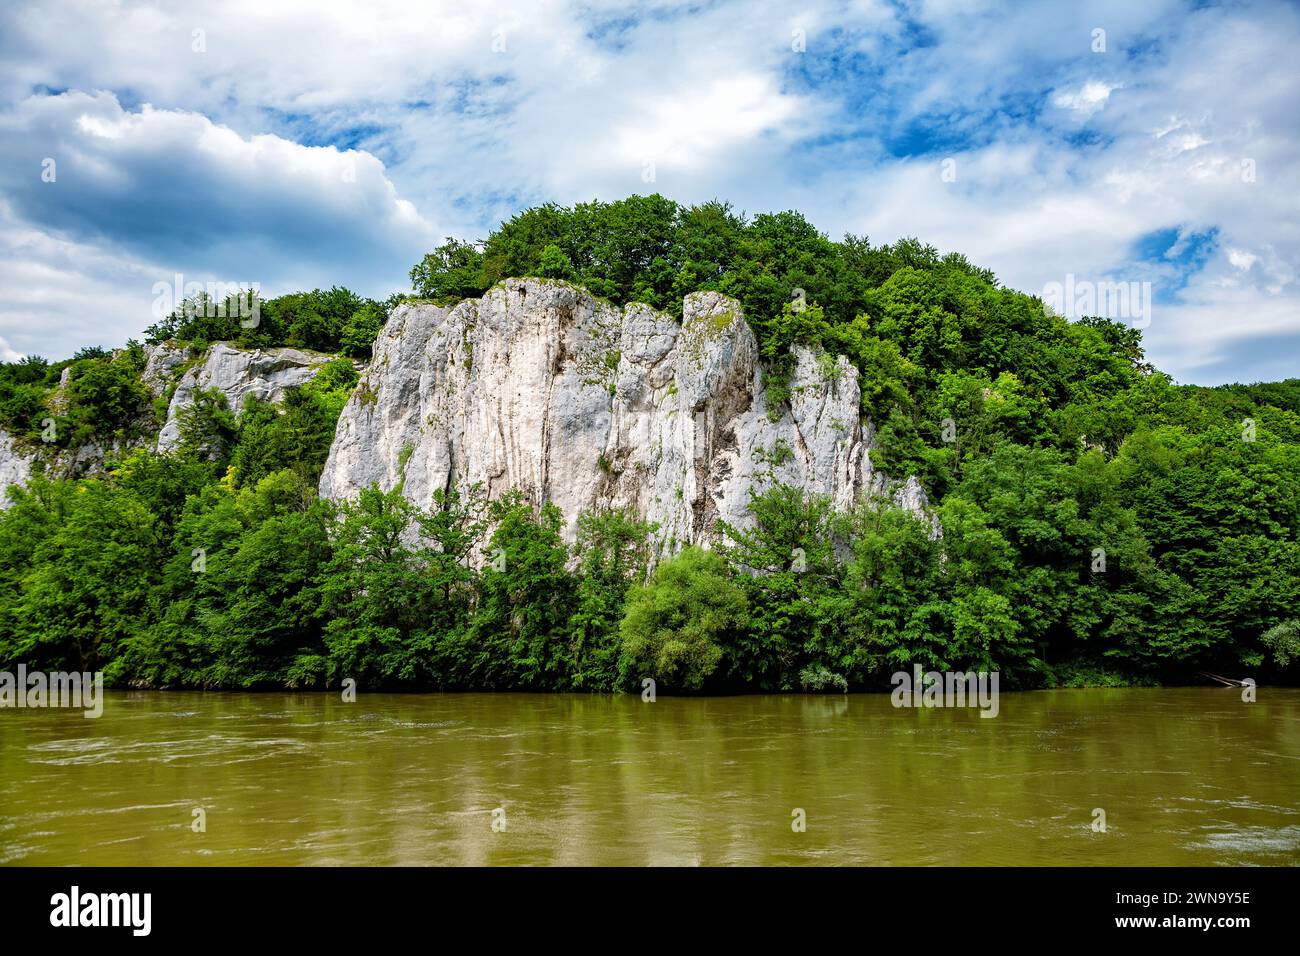 Danube Gorge, Donaudurchbruch, Weltenburg, Germany, Europe. Danube Gorge lies on the Lower Bavarian section of the River Danube between the town of Ke Stock Photo